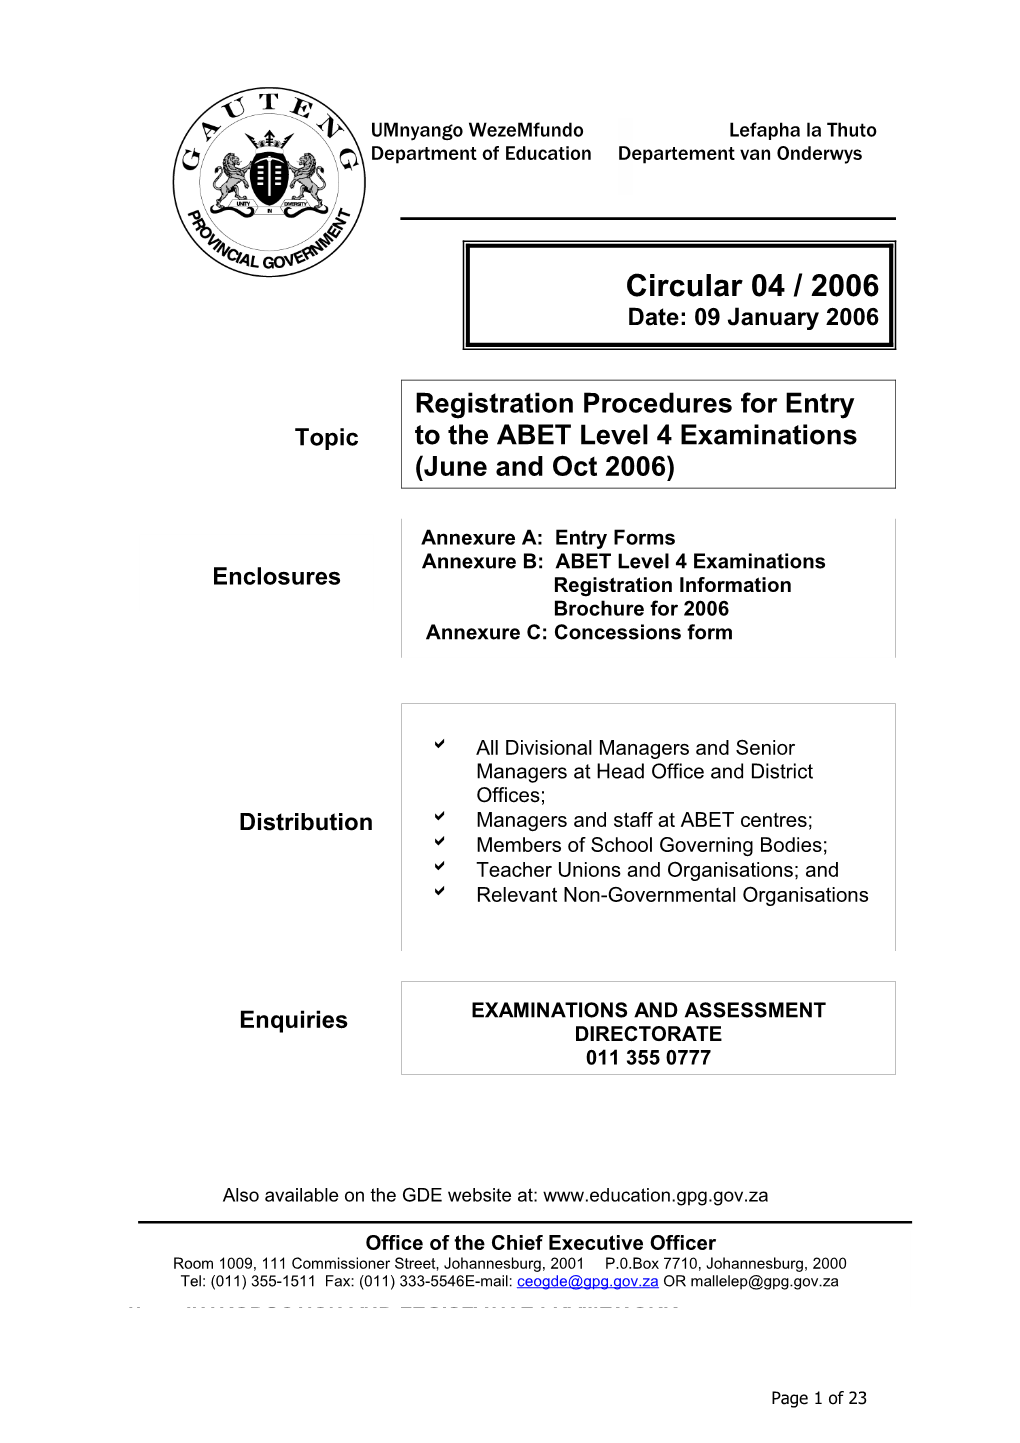 Circular 04 Registration Procedures for Entry to the ABET Level 4 Examinations (June And